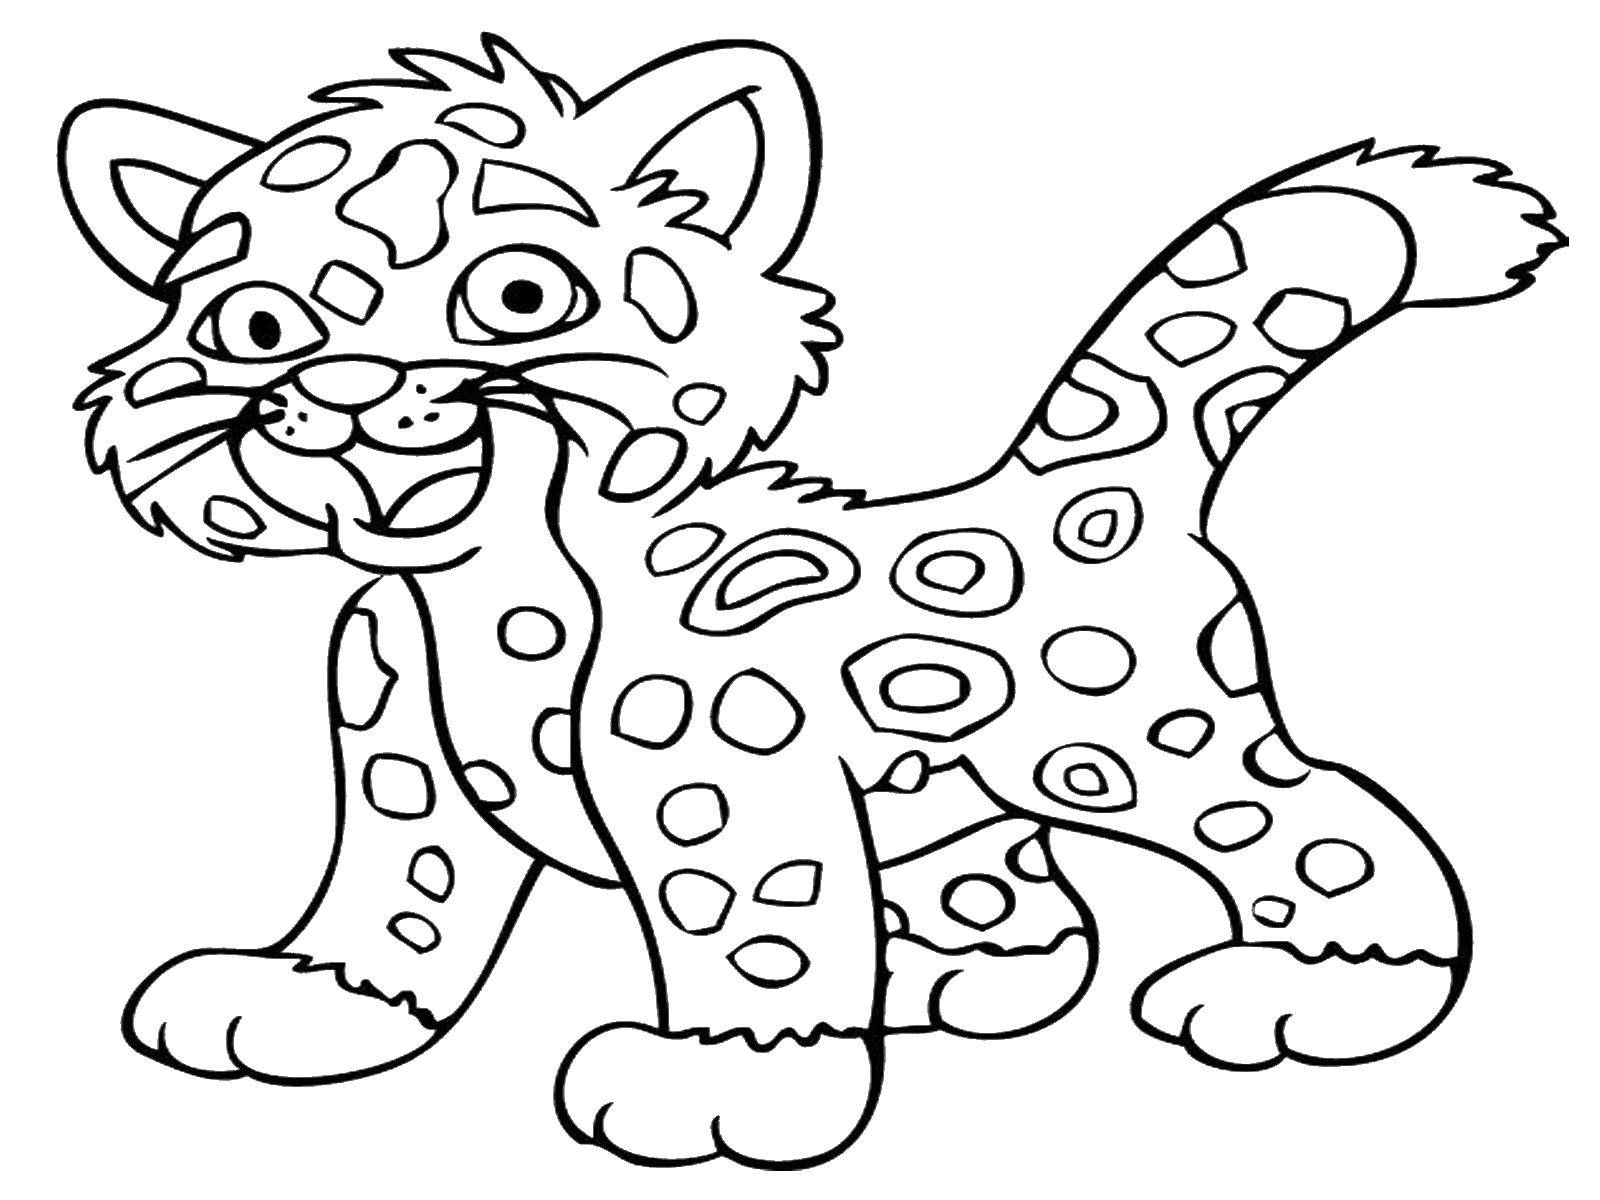 Coloring Baby leopard. Category animals. Tags:  animals, leopard.